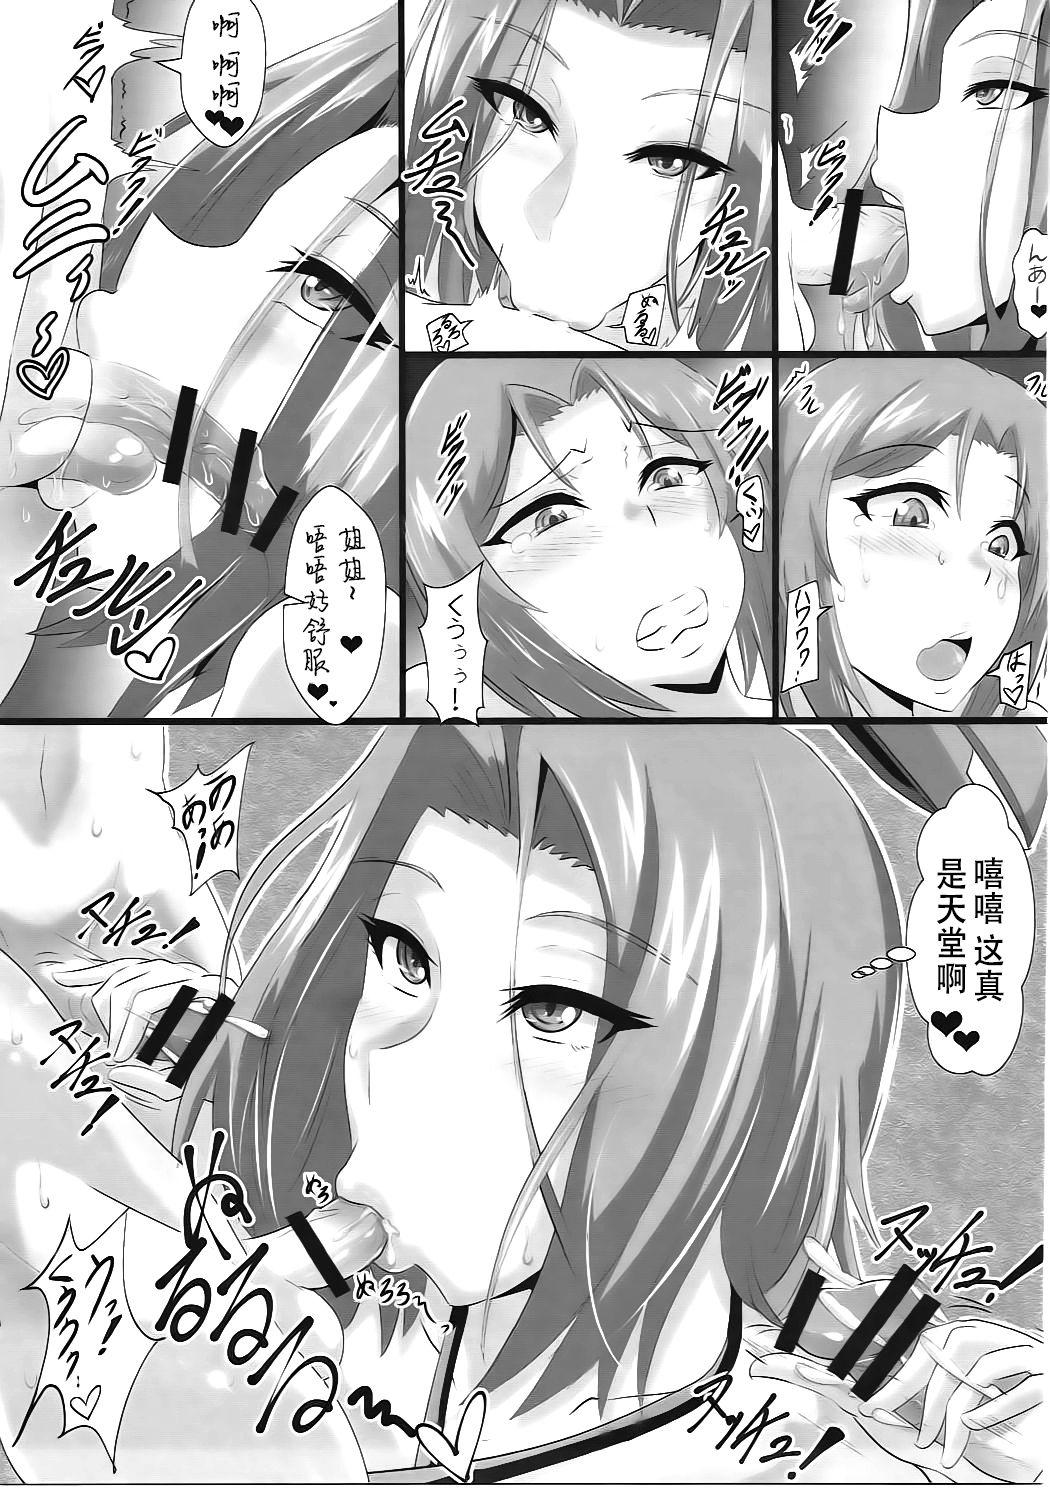 Parody Gehenna 4 - Kantai collection Ejaculations - Page 7